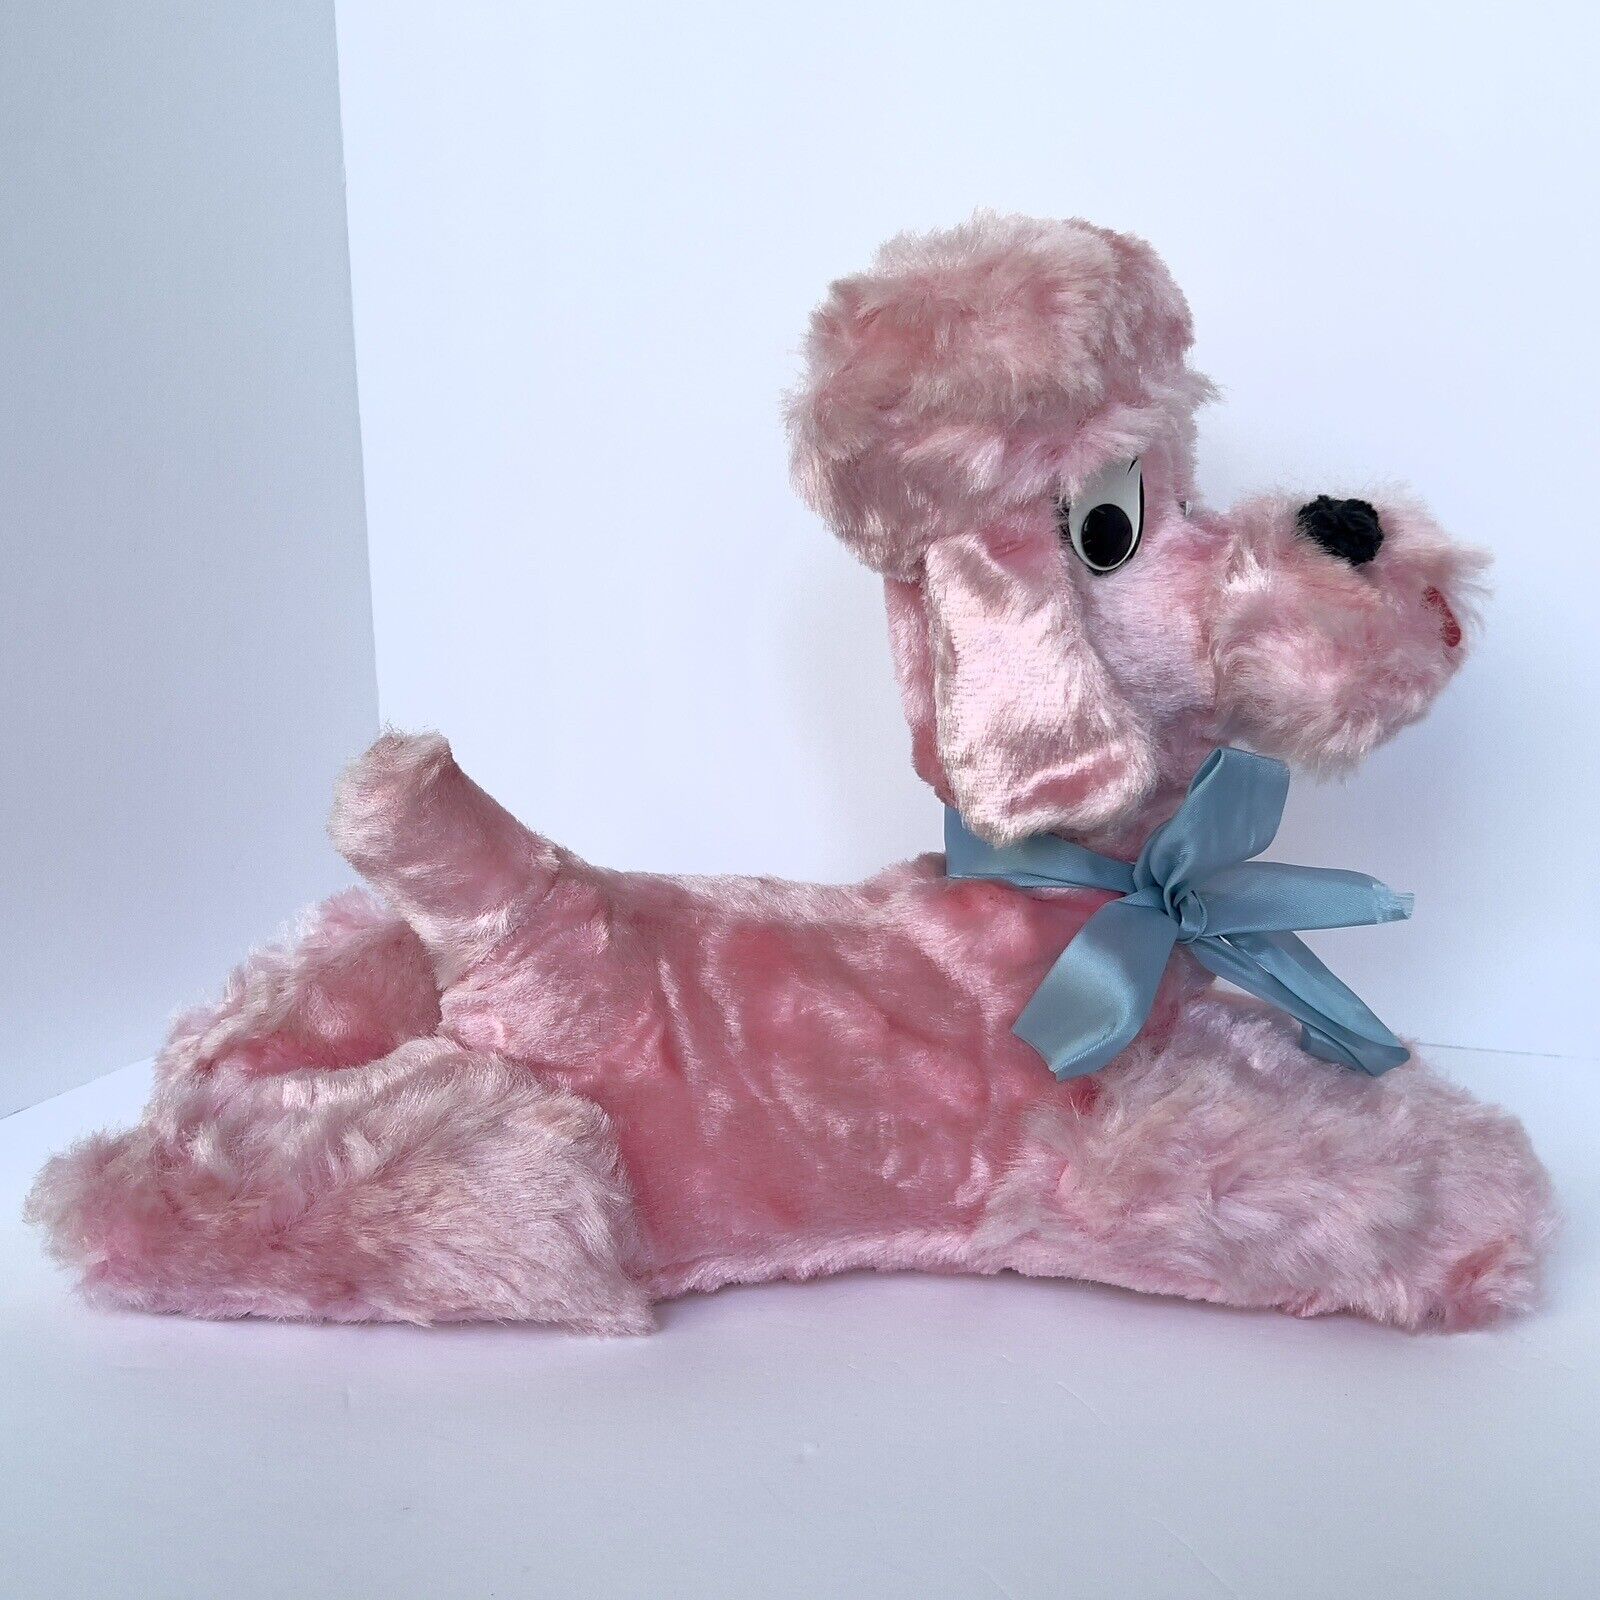 Vintage Dollcraft Style Pink Poodle Plush 50s/60s Pretty Eyes Firm Body Hip Hop